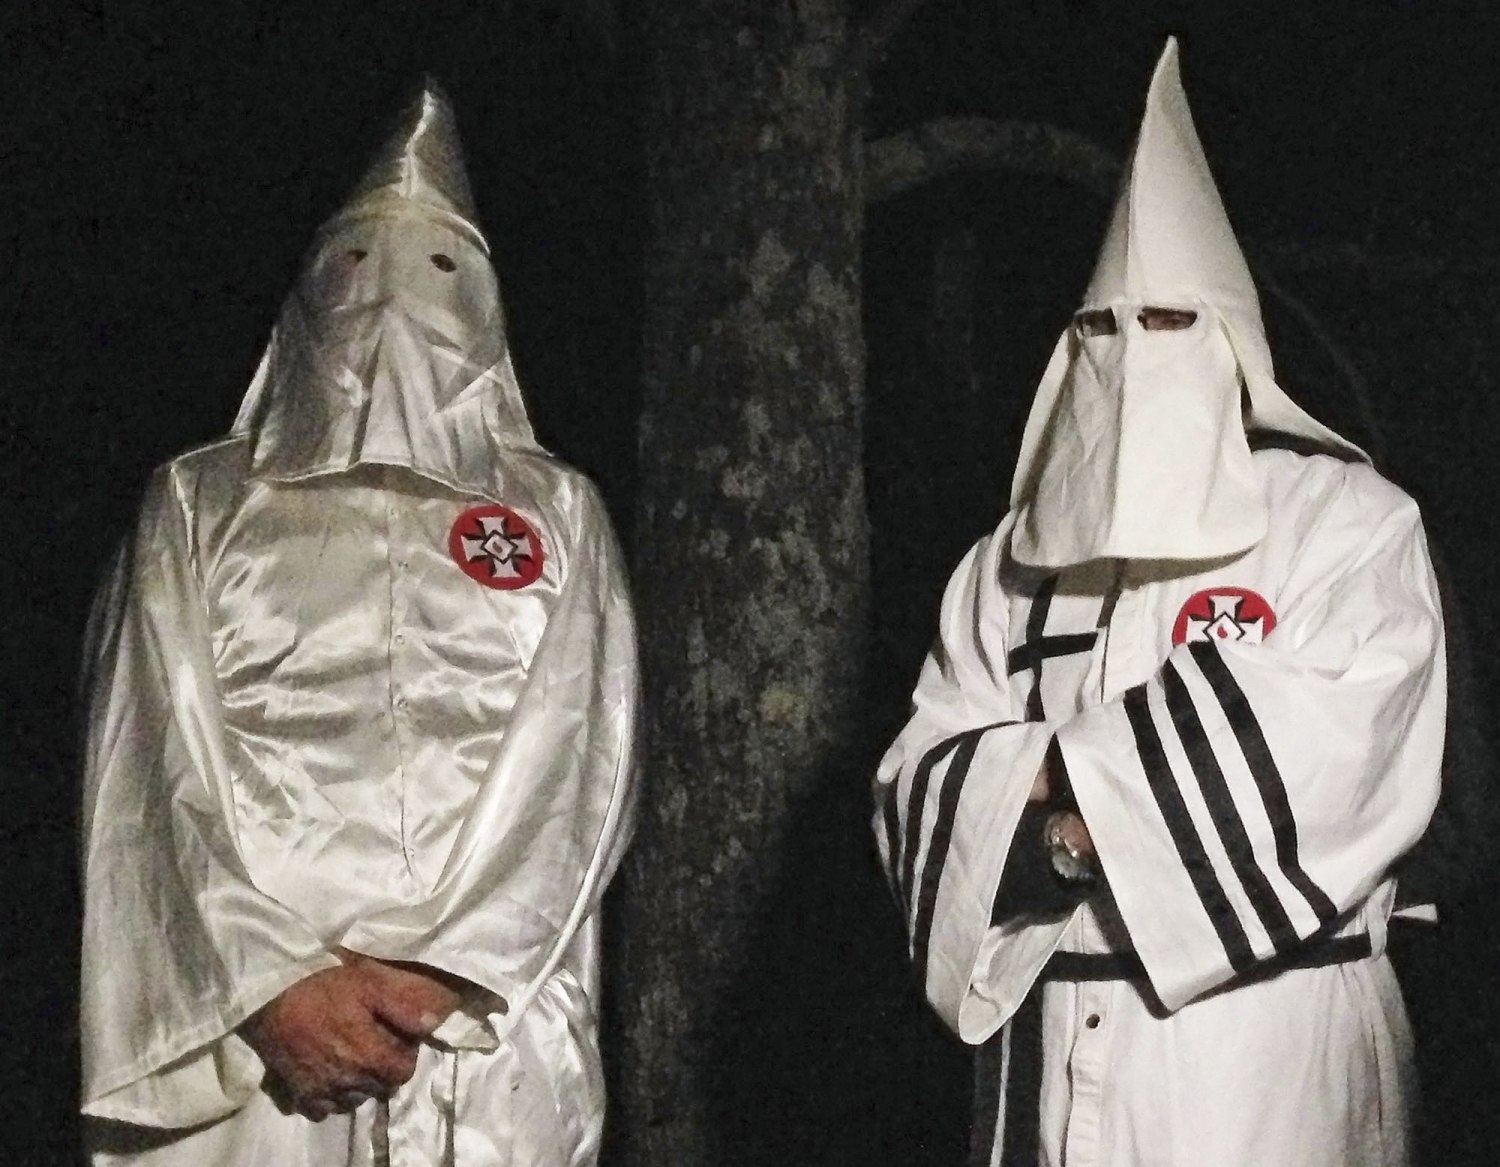 Ahead of Pro-Trump Rally, KKK Members Claim They're 'Not White